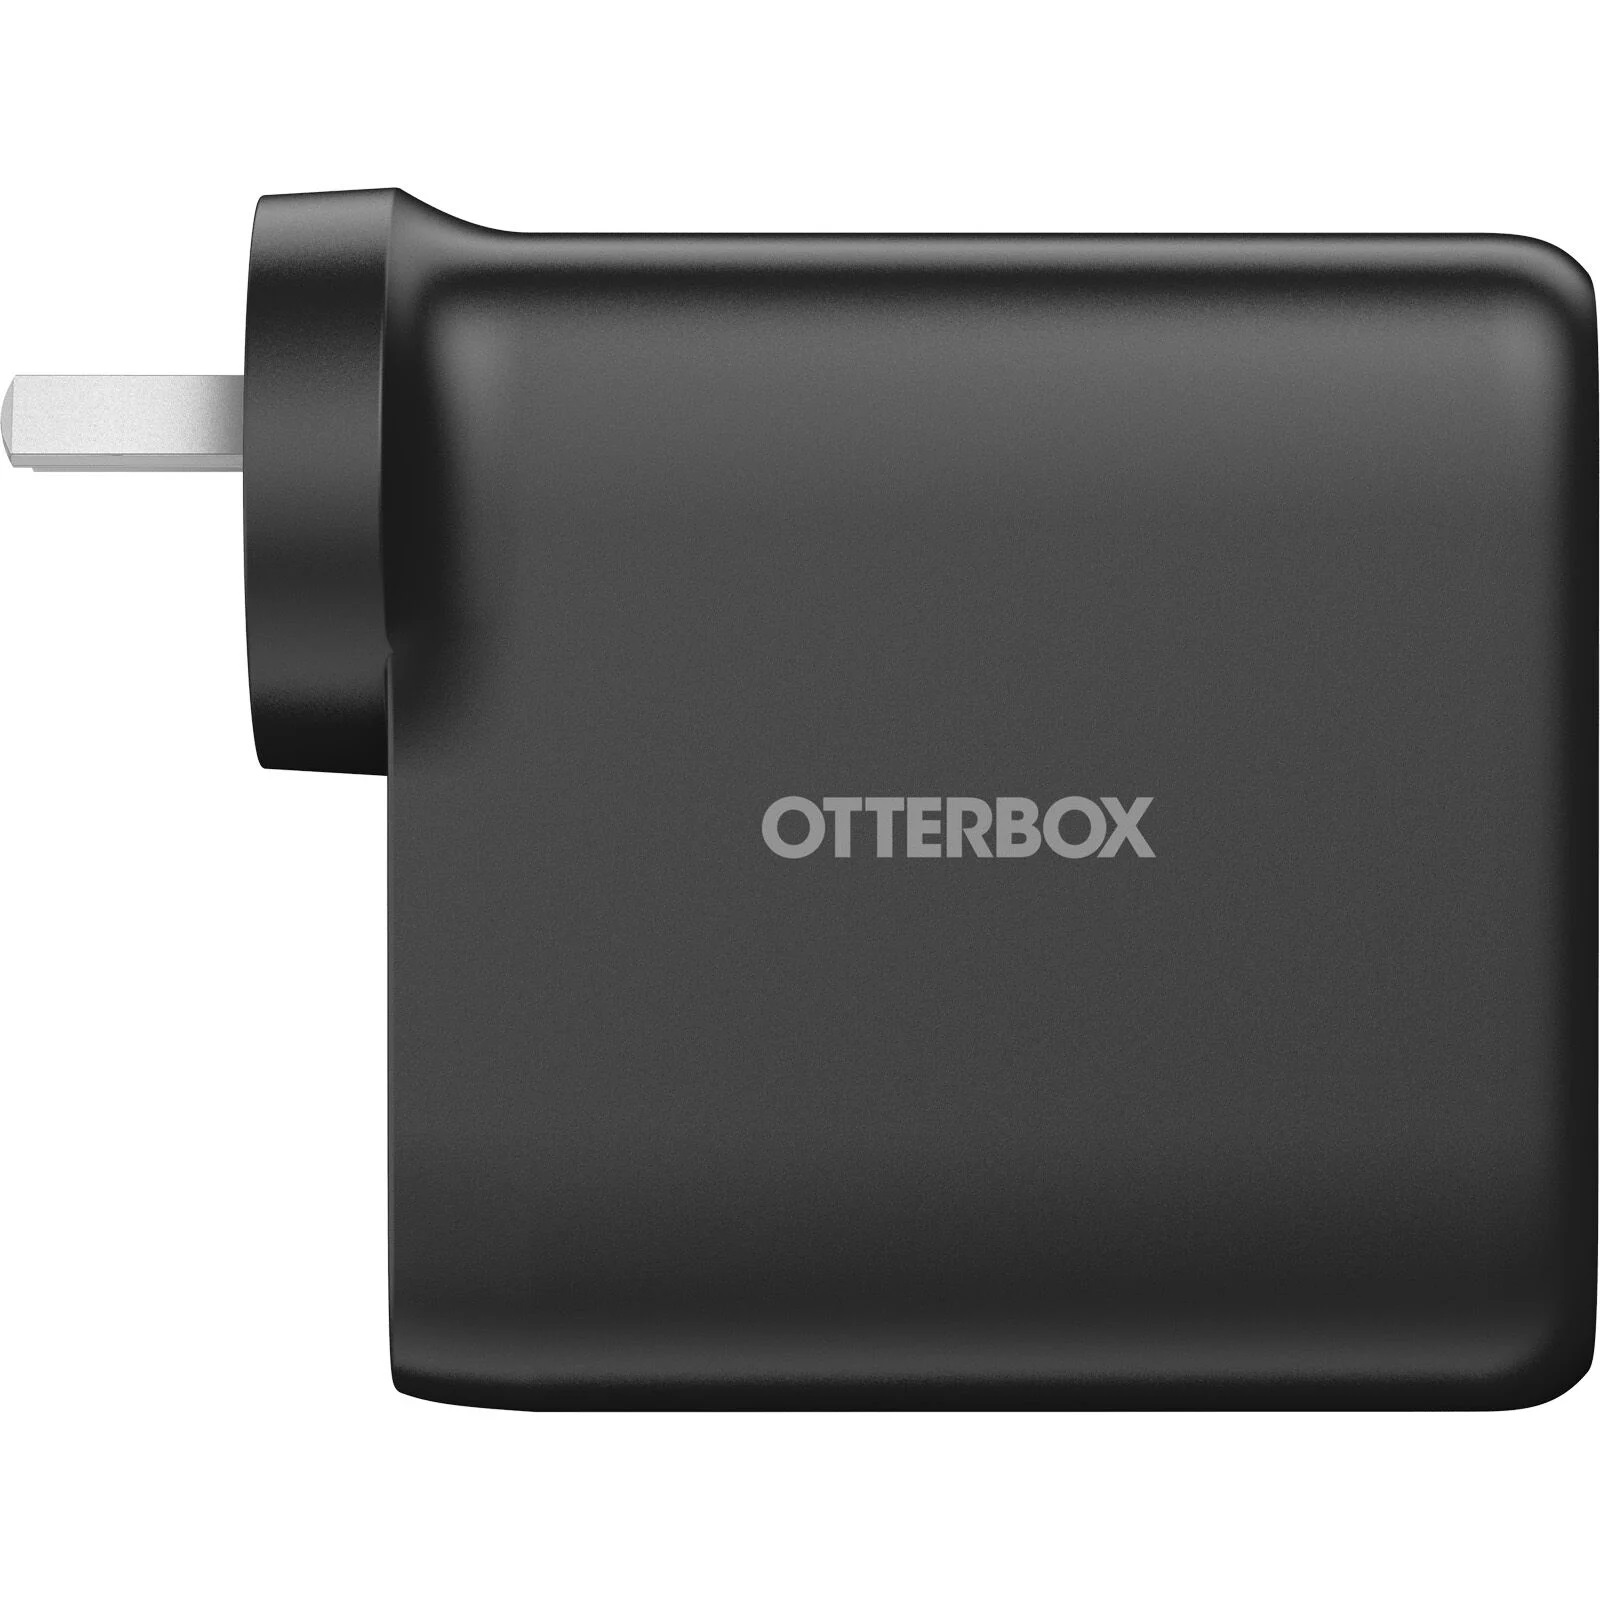 OtterBox 100W Four Port USB-C (Type I) PD Fast GaN Wall Charger – Black (78-81355), Dual USB-C (100W+18W), Dual USB-A (18W), Compact, Laptop Charger